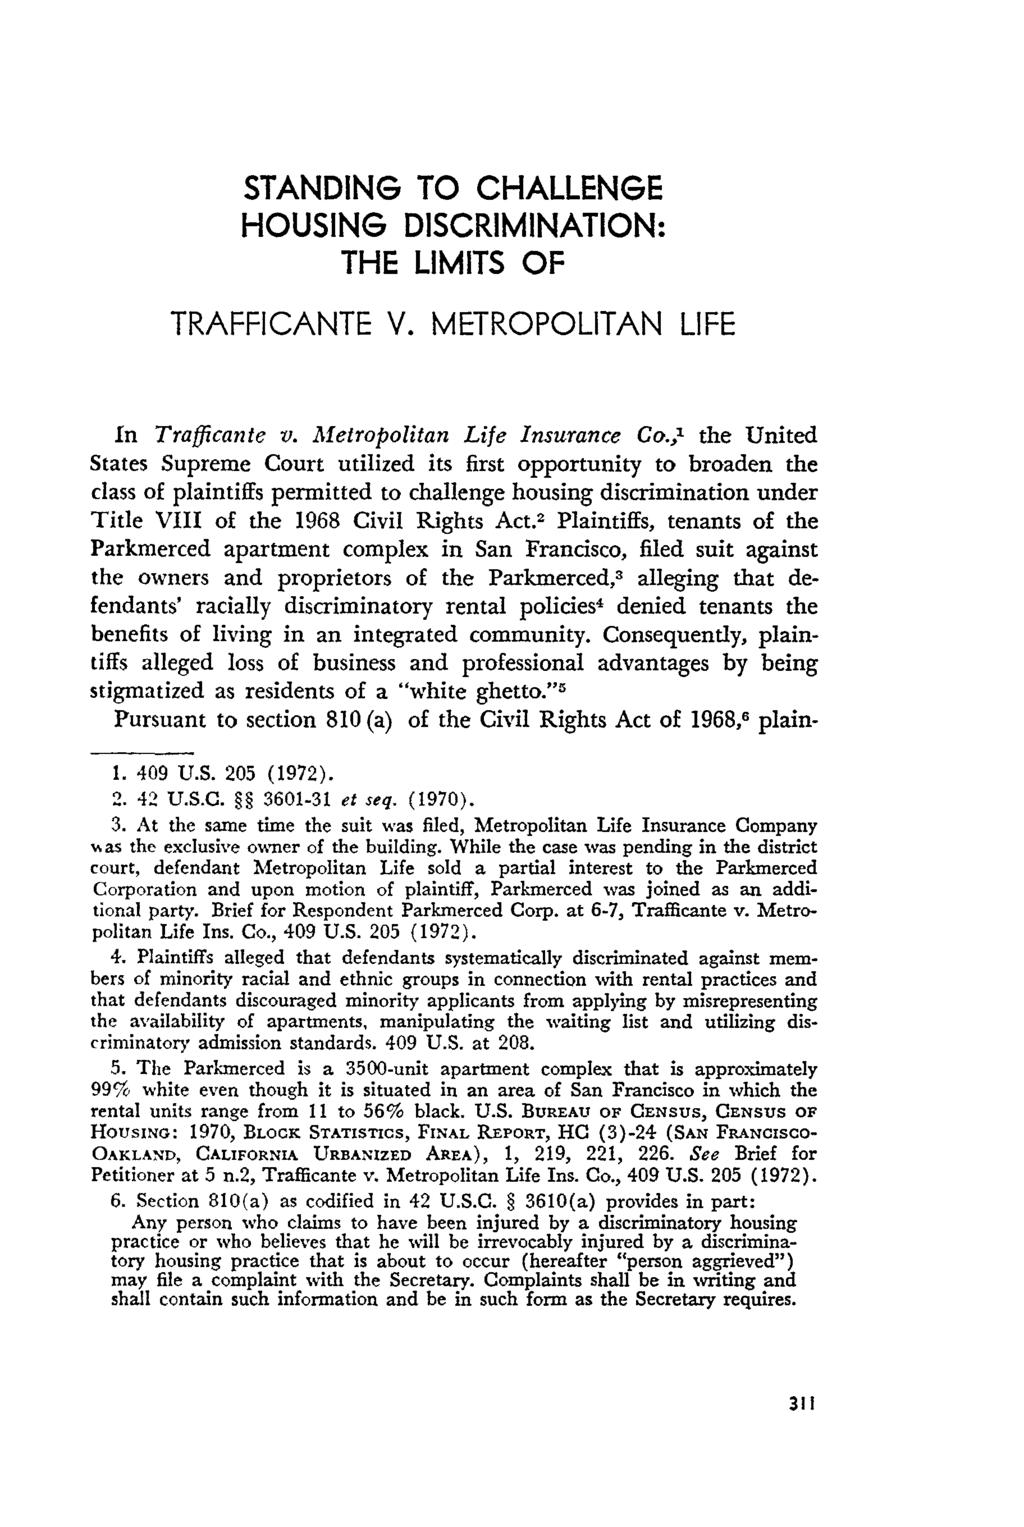 STANDING TO CHALLENGE HOUSING DISCRIMINATION: THE LIMITS OF TRAFFICANTE V. METROPOLITAN LIFE In Traficante v. Metropolitan Life Insurance Co.